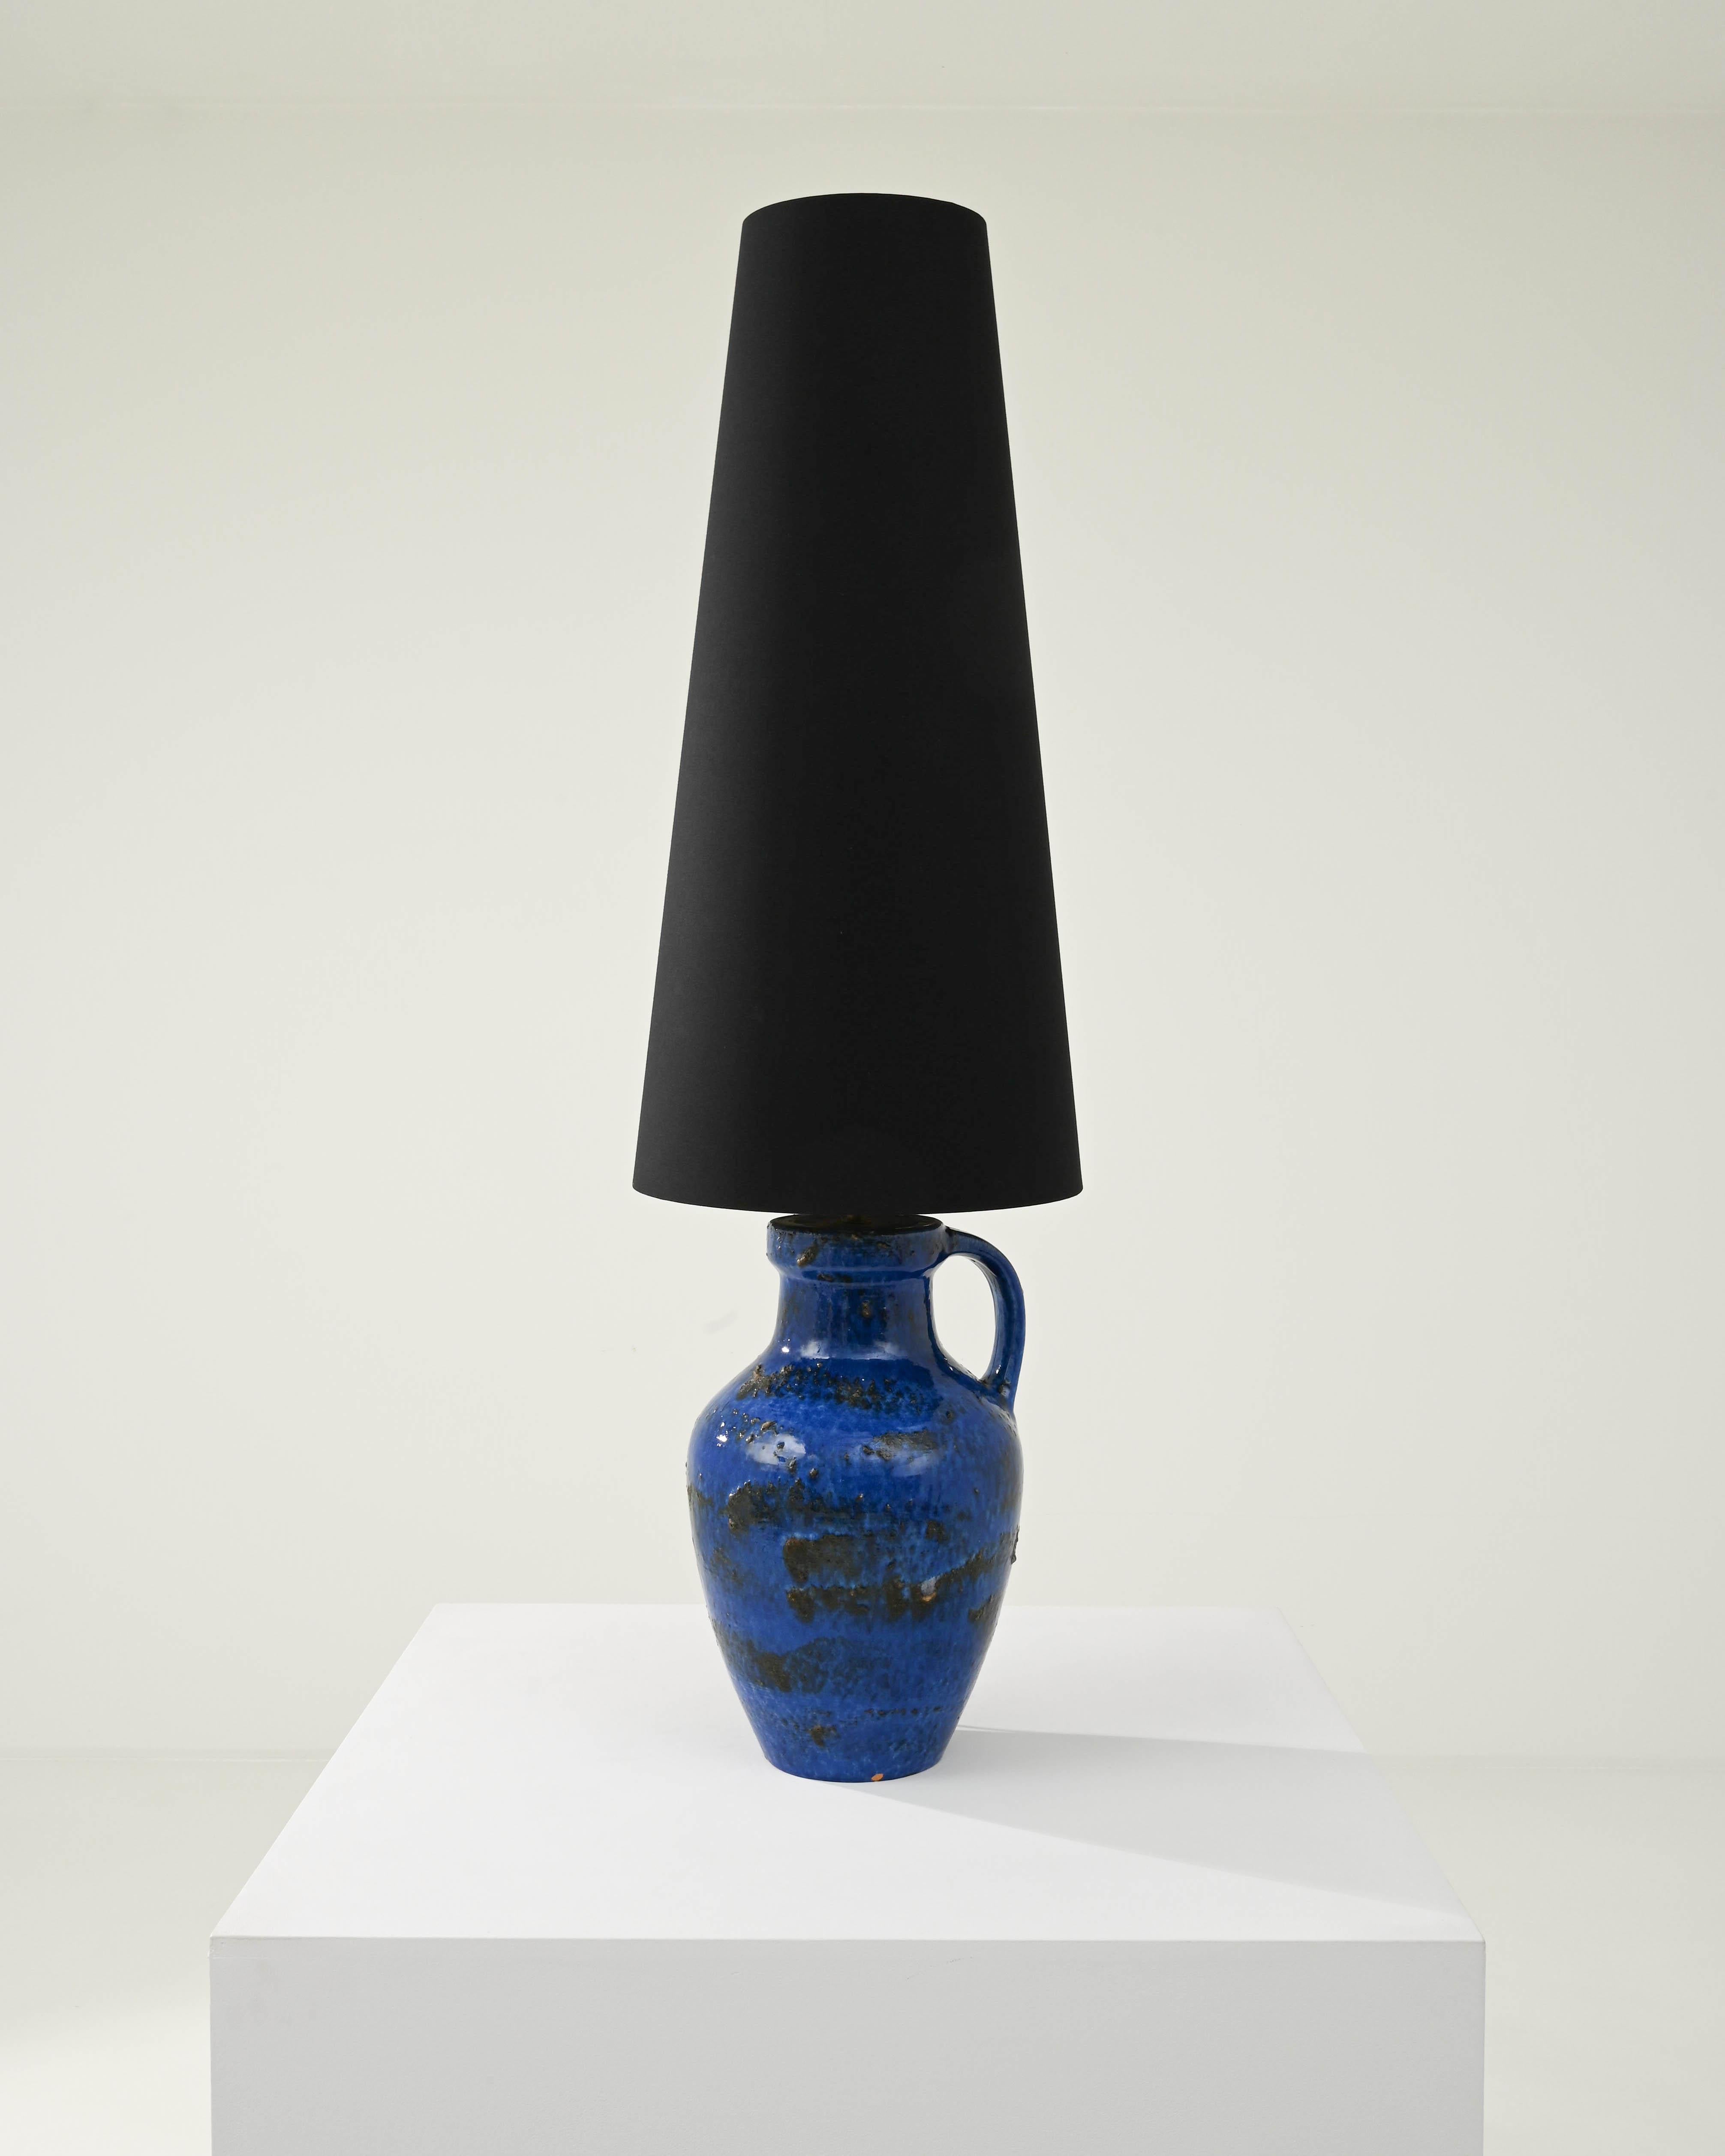 An exceptional find to inspire your collection. Designed in 1960s Germany, this distinctive vase has been adapted into a beautiful table lamp; the tall black lampshade is supported by a brass bulb socket. The fabric shade compliments the beautiful